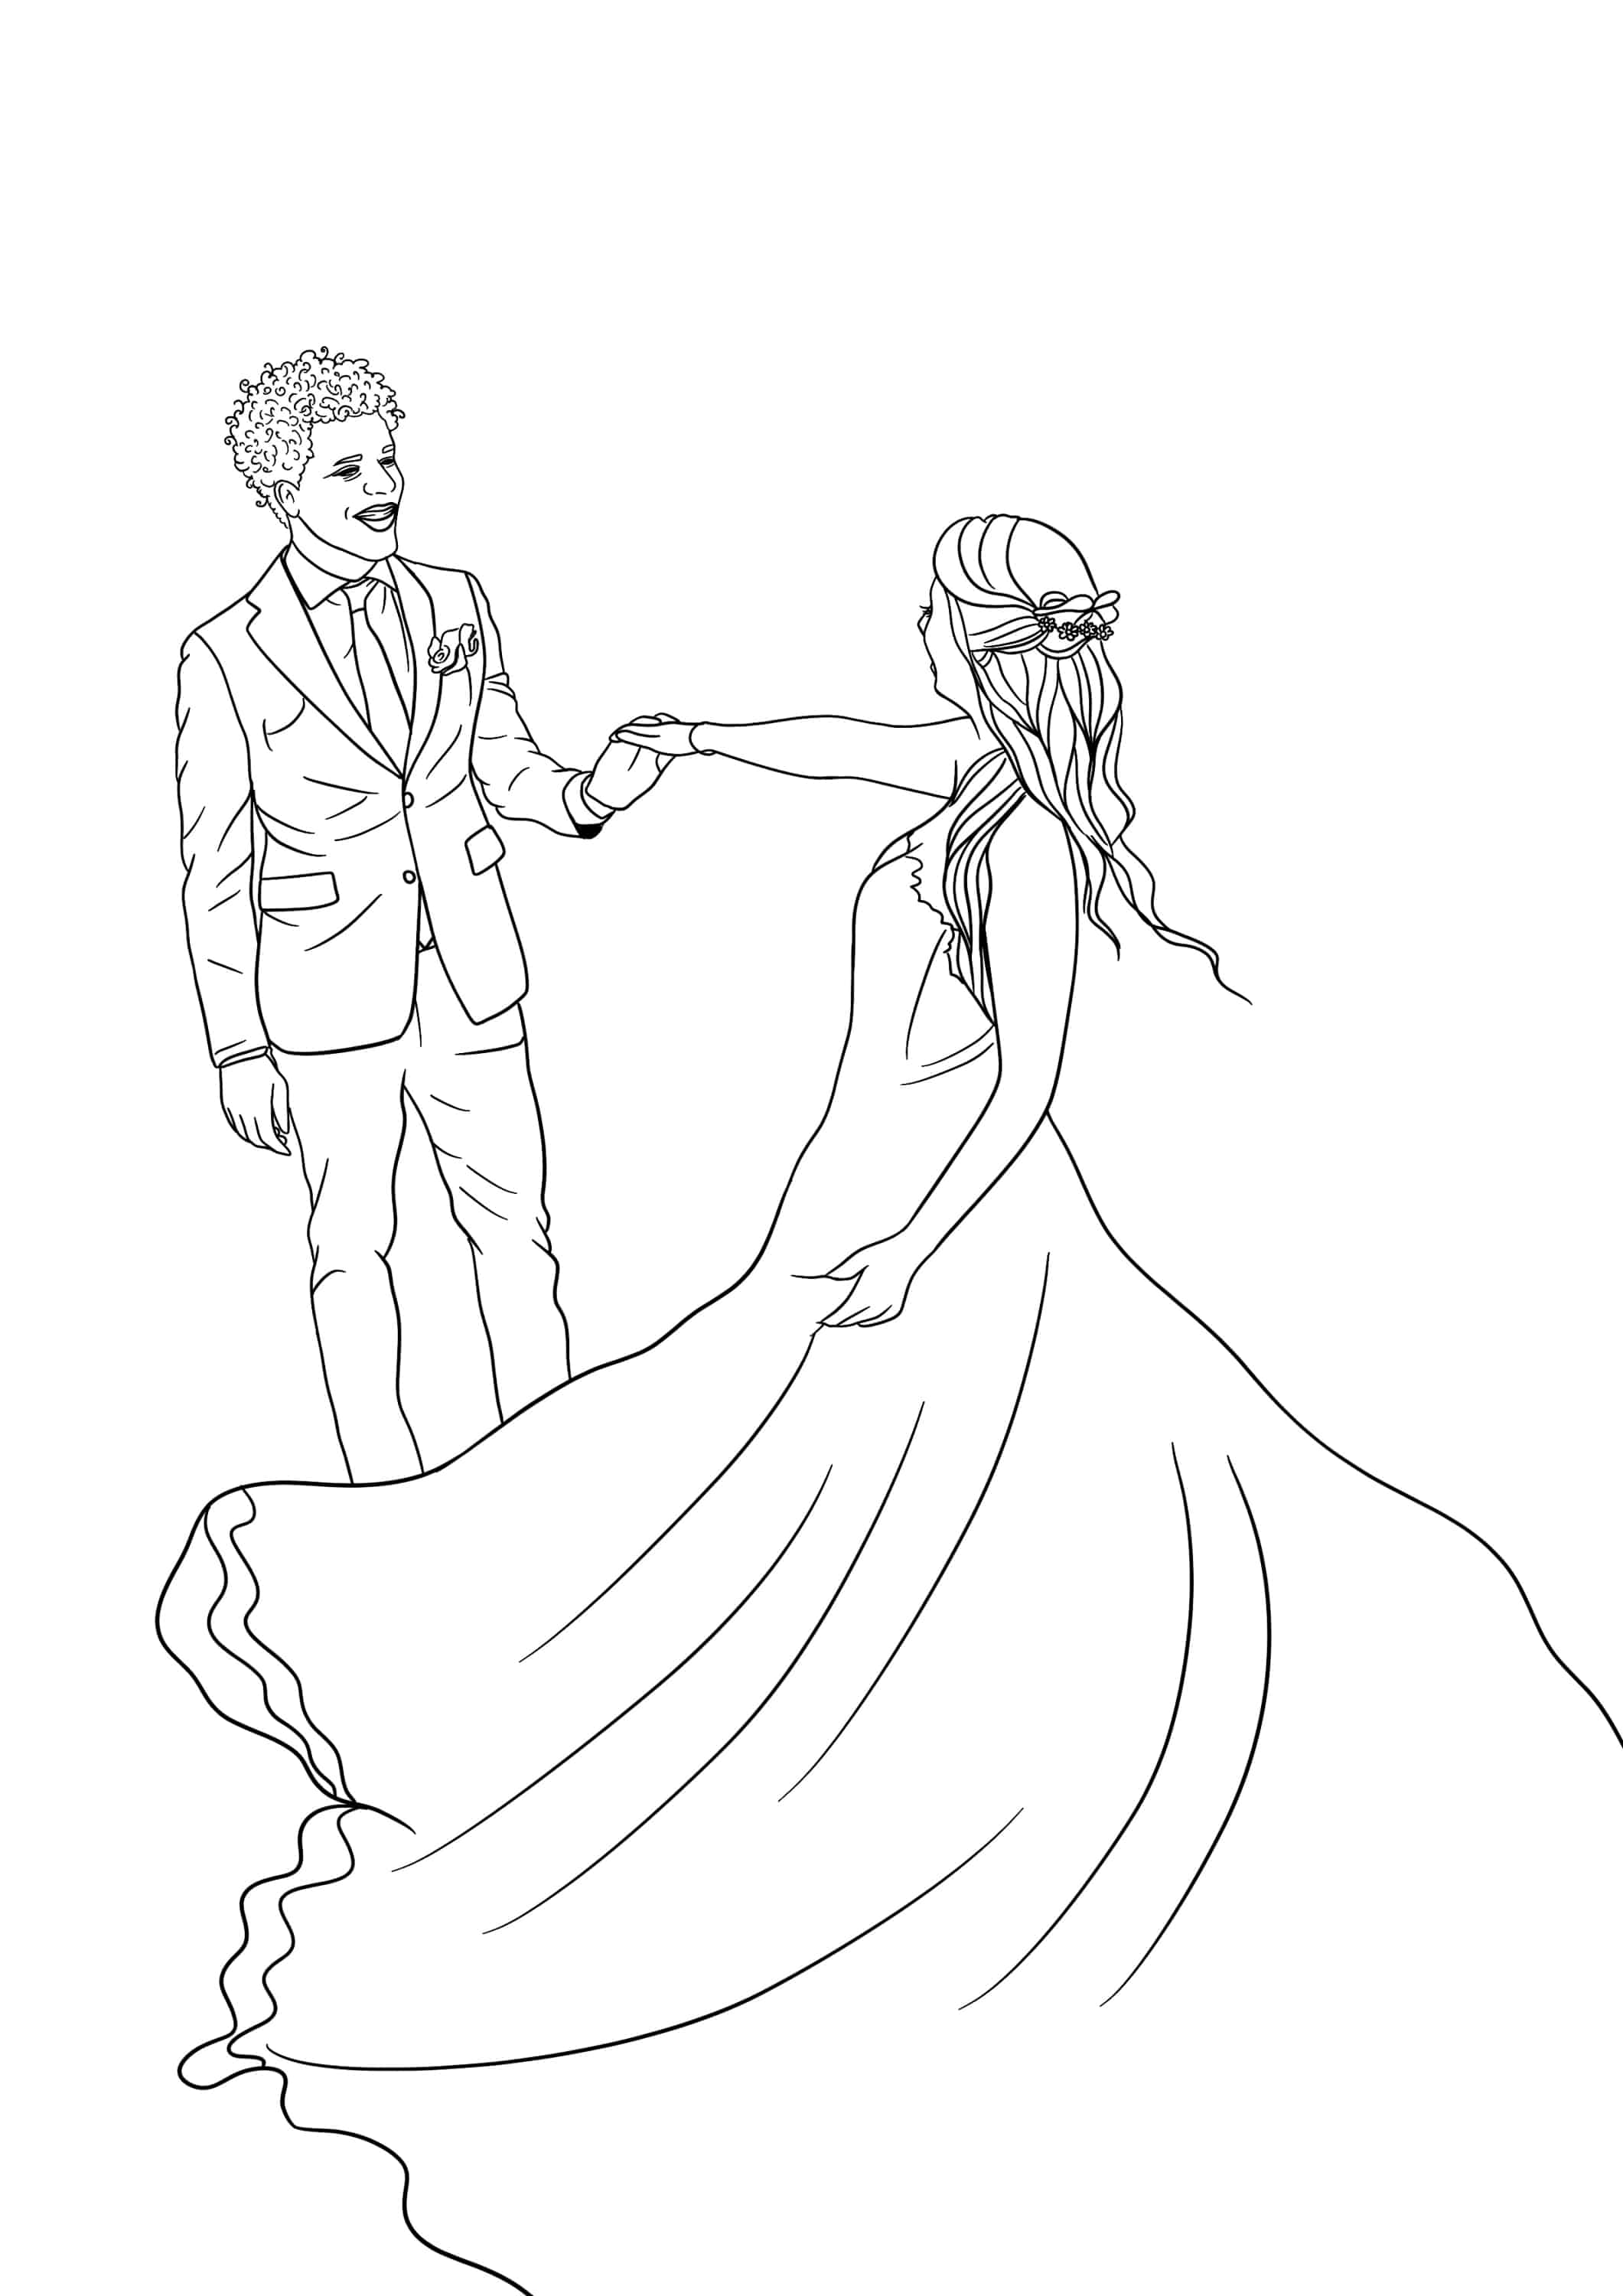 Wedding colouring page of a bride and groom with a beautiful wedding dress